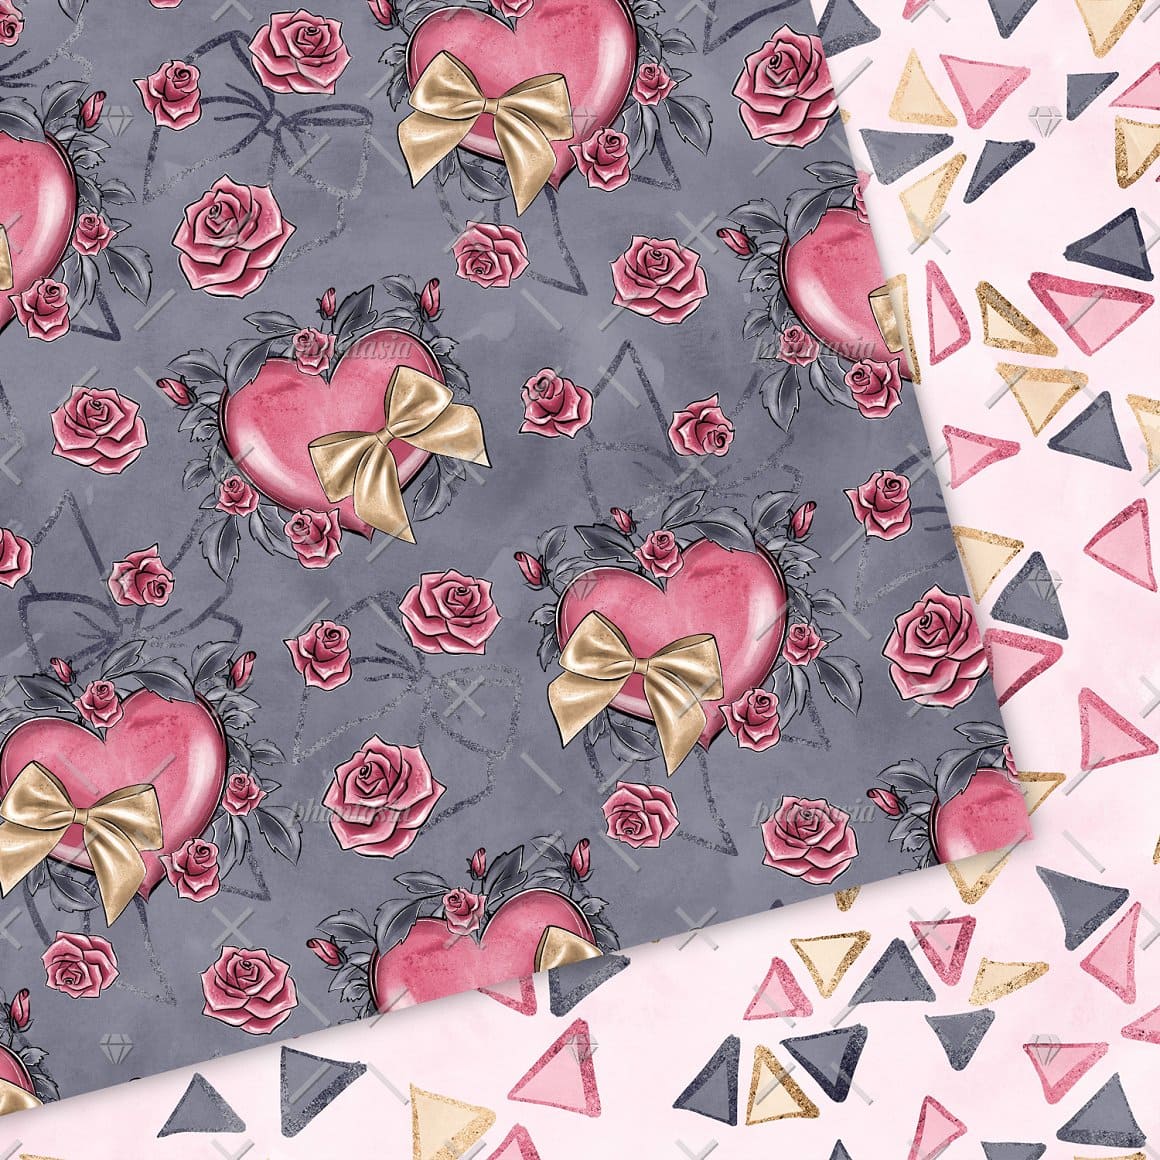 Image of two patterns with romantic patterns.